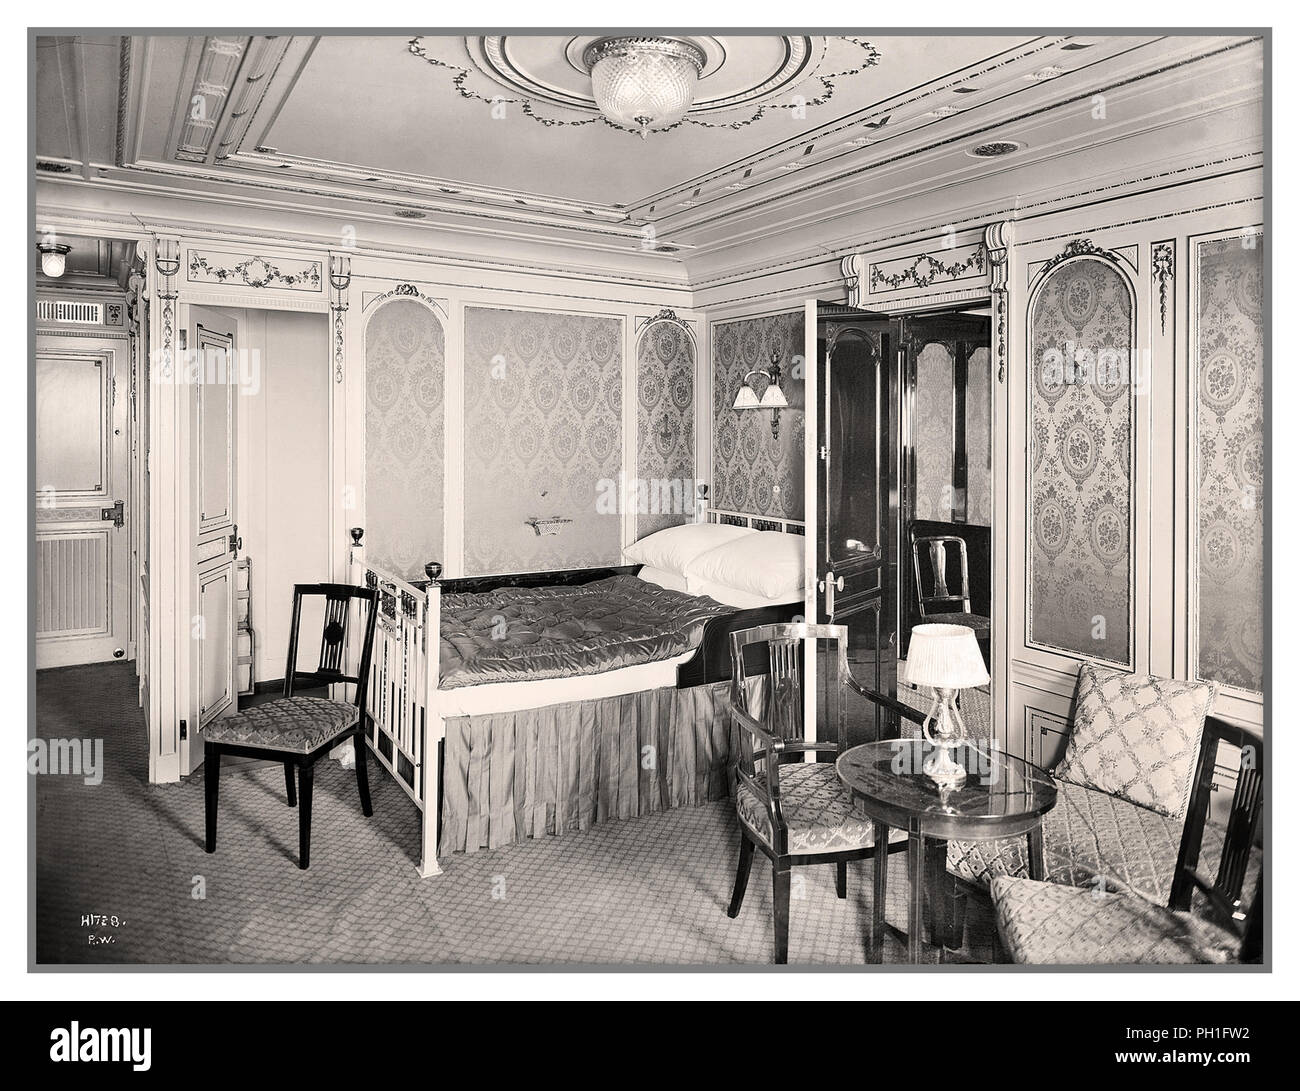 TITANIC 1900's Interior RMS Titanic First Class Bedroom Suite (B38) the height of Ocean Liner Luxury in the 1900's Stock Photo